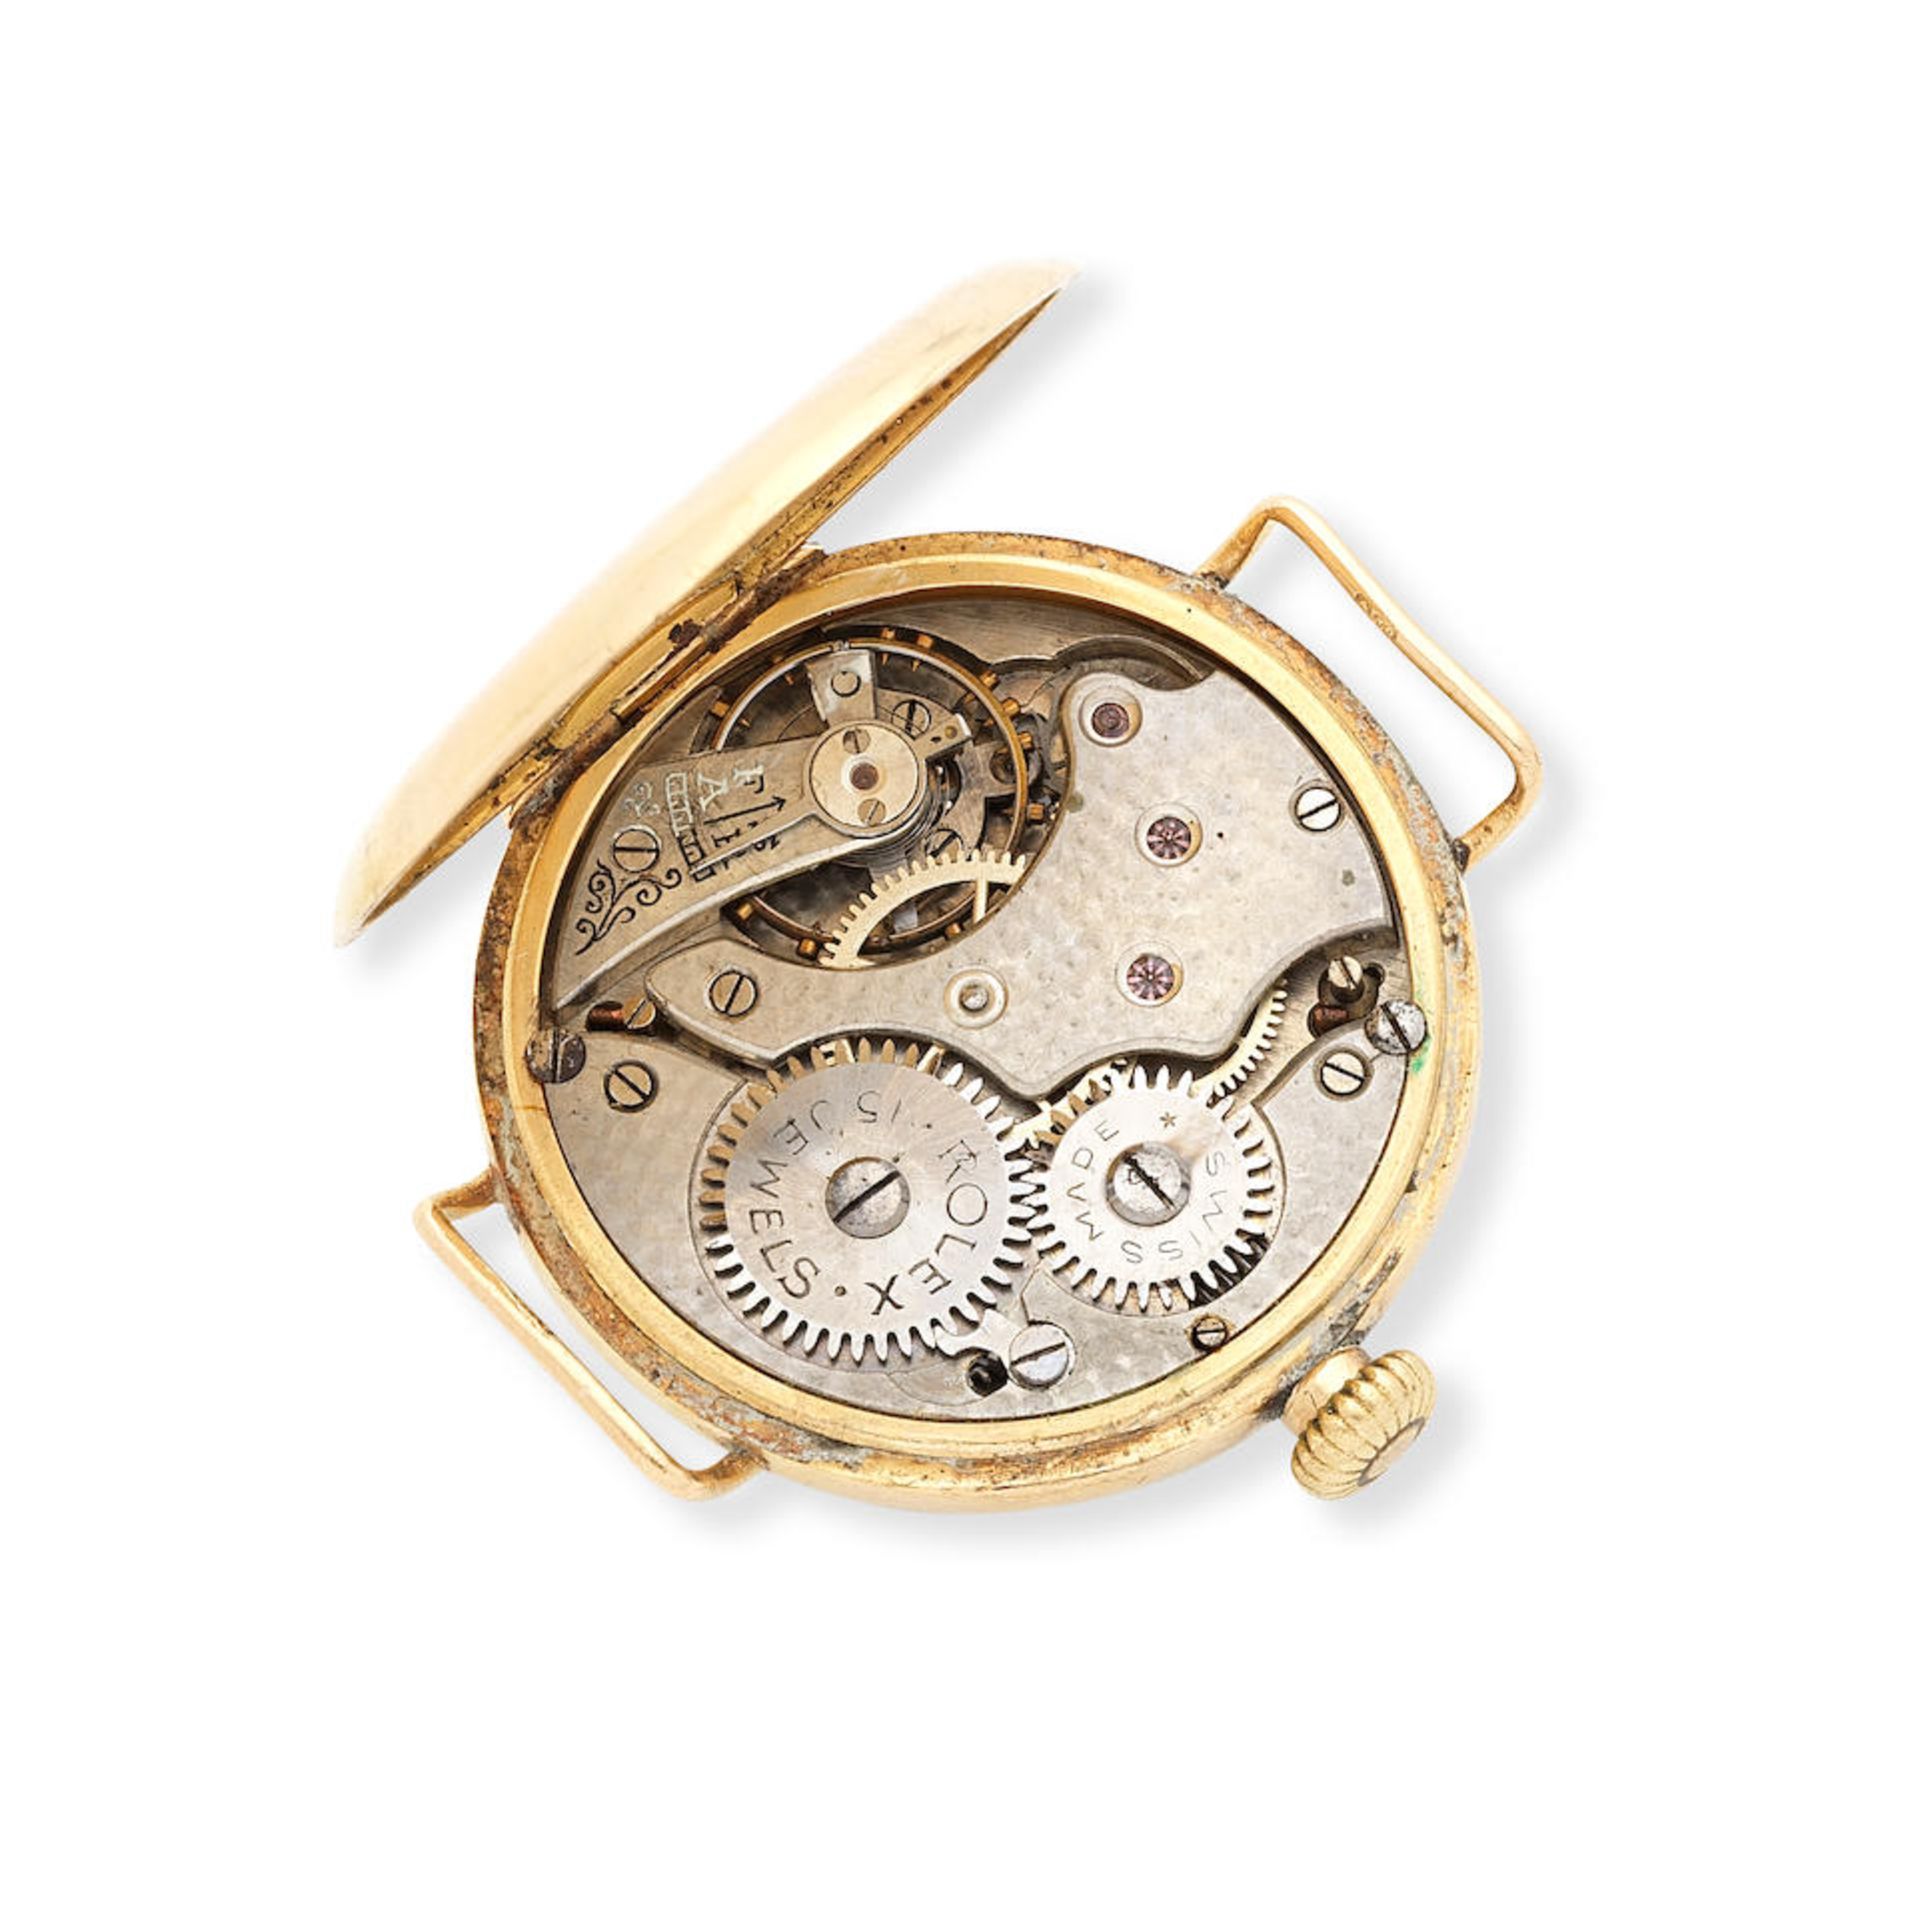 Rolex. An 18K gold manual wind trench style wristwatch Birmingham Hallmark for 1919 - Image 3 of 5